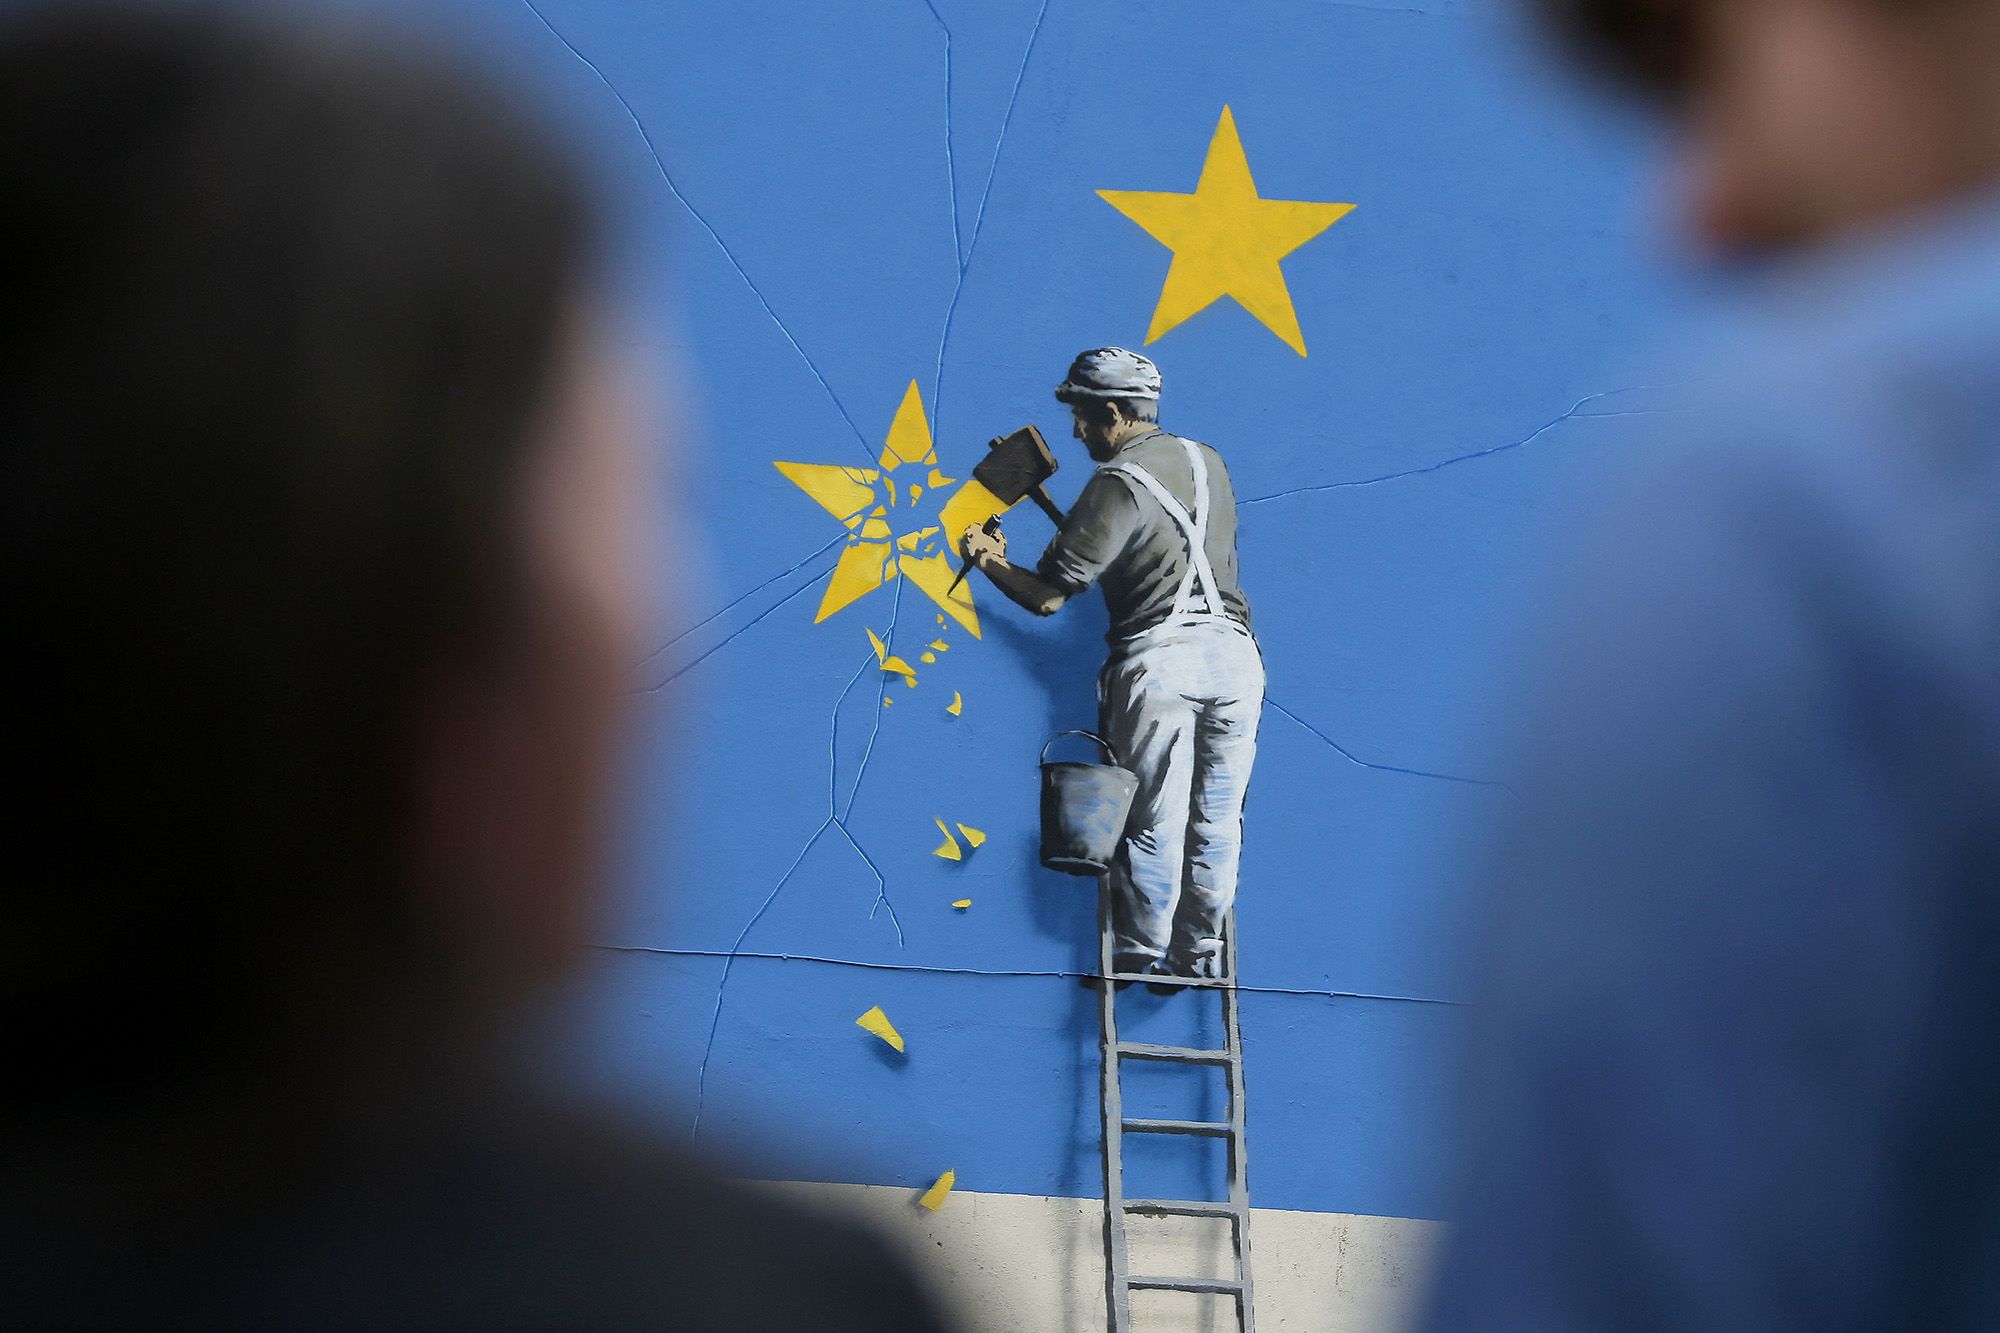 People stand near a recently painted mural by British graffiti artist Banksy, depicting a workman chipping away at one of the stars on a European Union (EU) themed flag, in Dover, south east England on May 8, 2017. (Photo by Daniel LEAL / AFP) / RESTRICTED TO EDITORIAL USE - MANDATORY MENTION OF THE ARTIST UPON PUBLICATION - TO ILLUSTRATE THE EVENT AS SPECIFIED IN THE CAPTION (Photo by DANIEL LEAL/AFP via Getty Images)